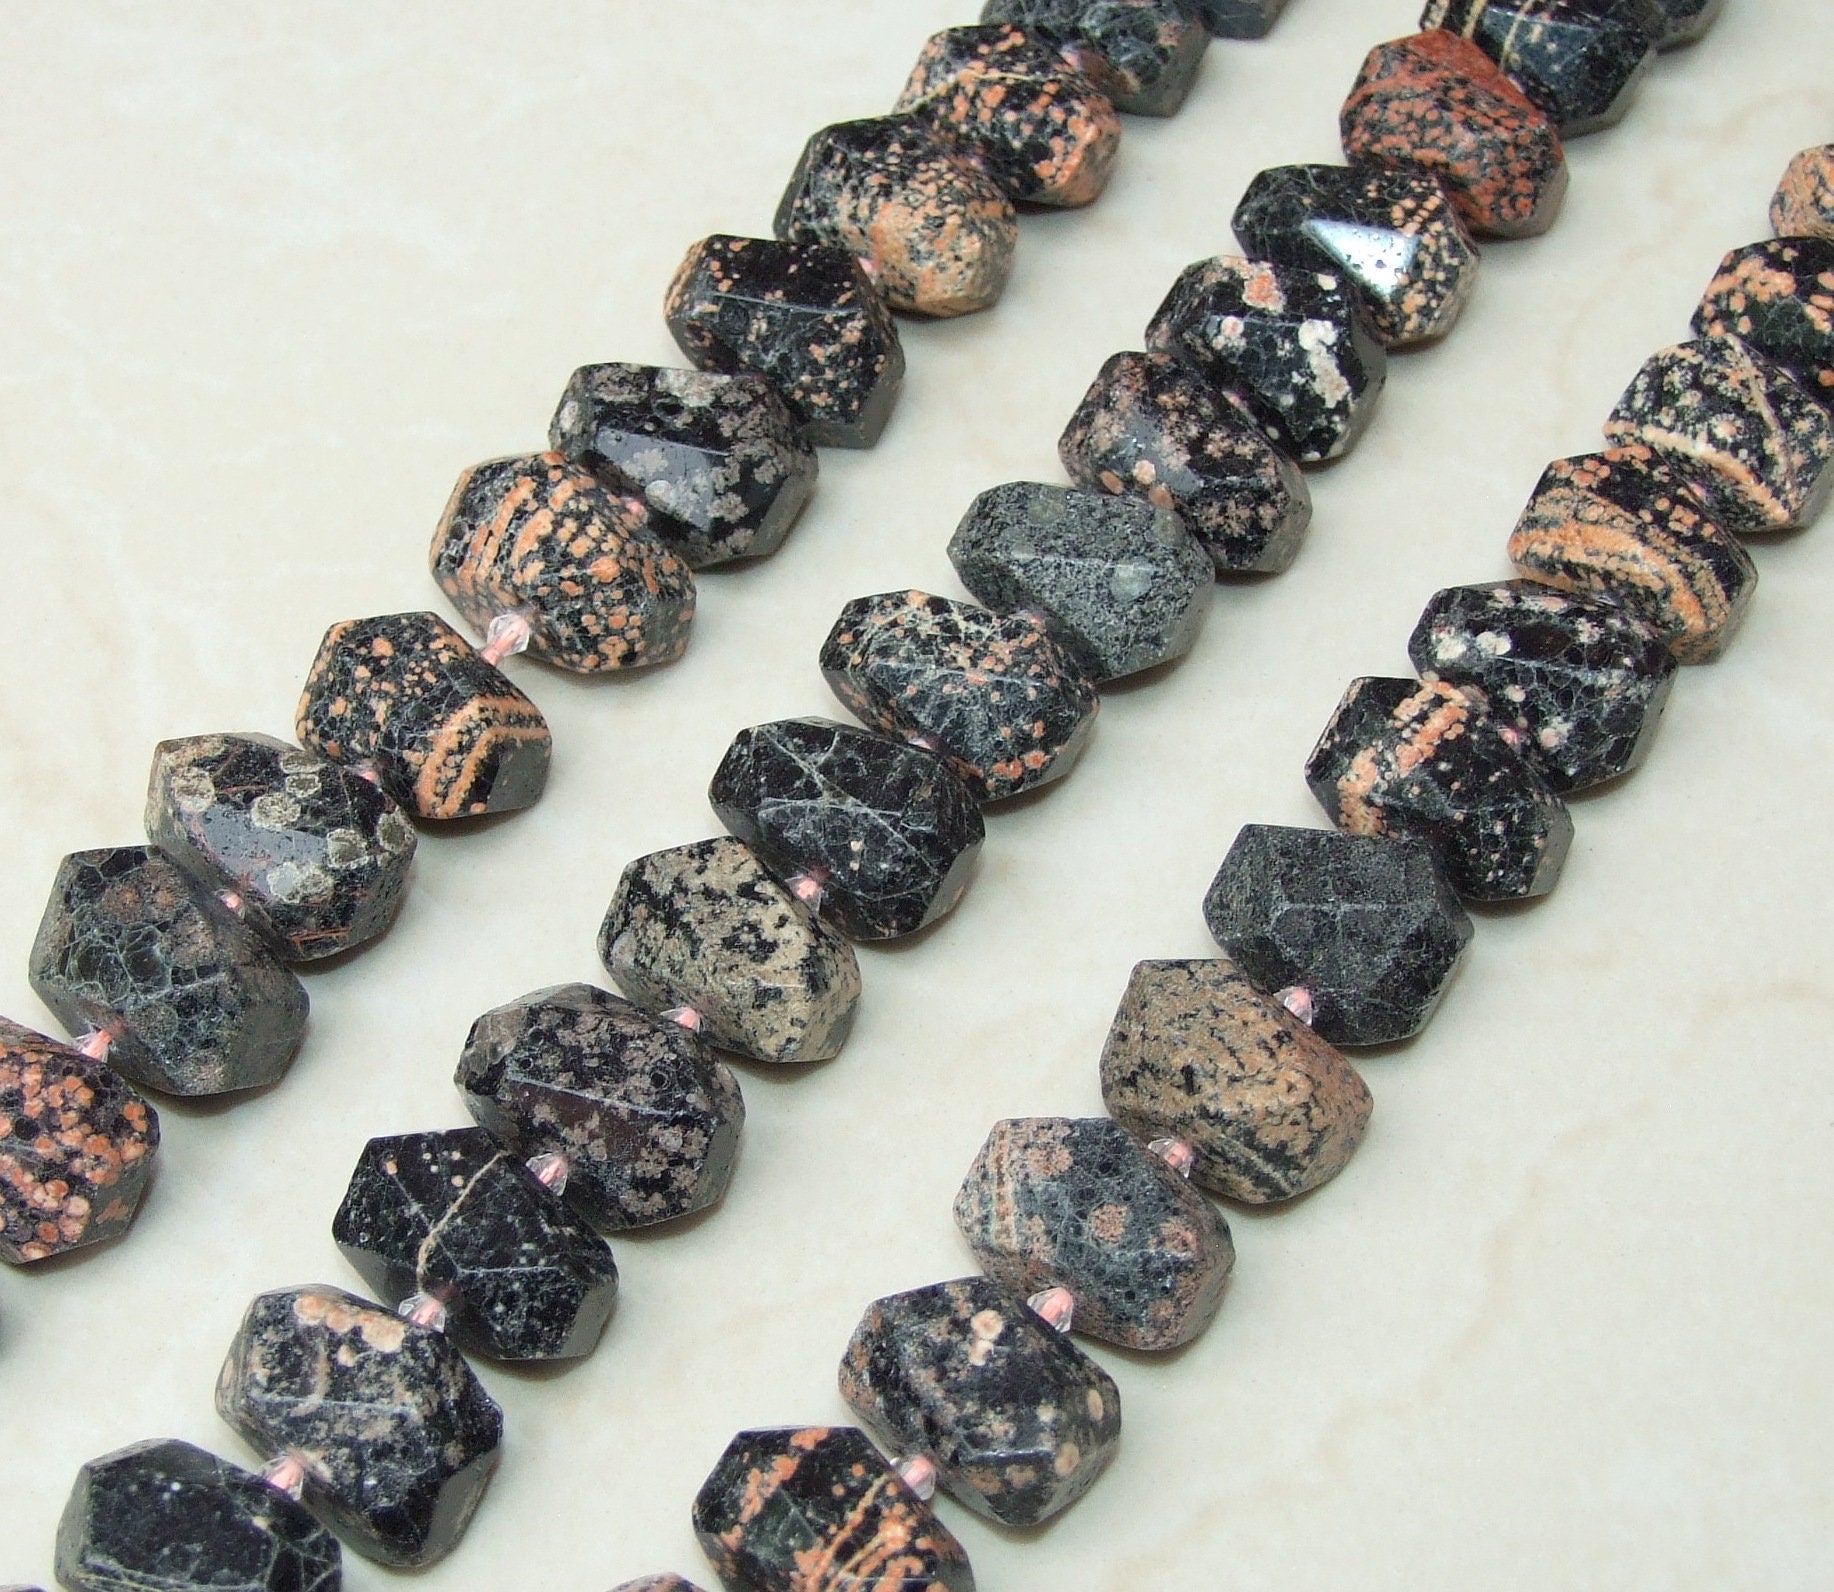 Snowflake Obsidian Faceted Nugget, Polished Obsidian Pendant, Gemstone Beads, Jewelry Stones, Obsidian Beads, Half Strand 13mm x 15mm x 23mm